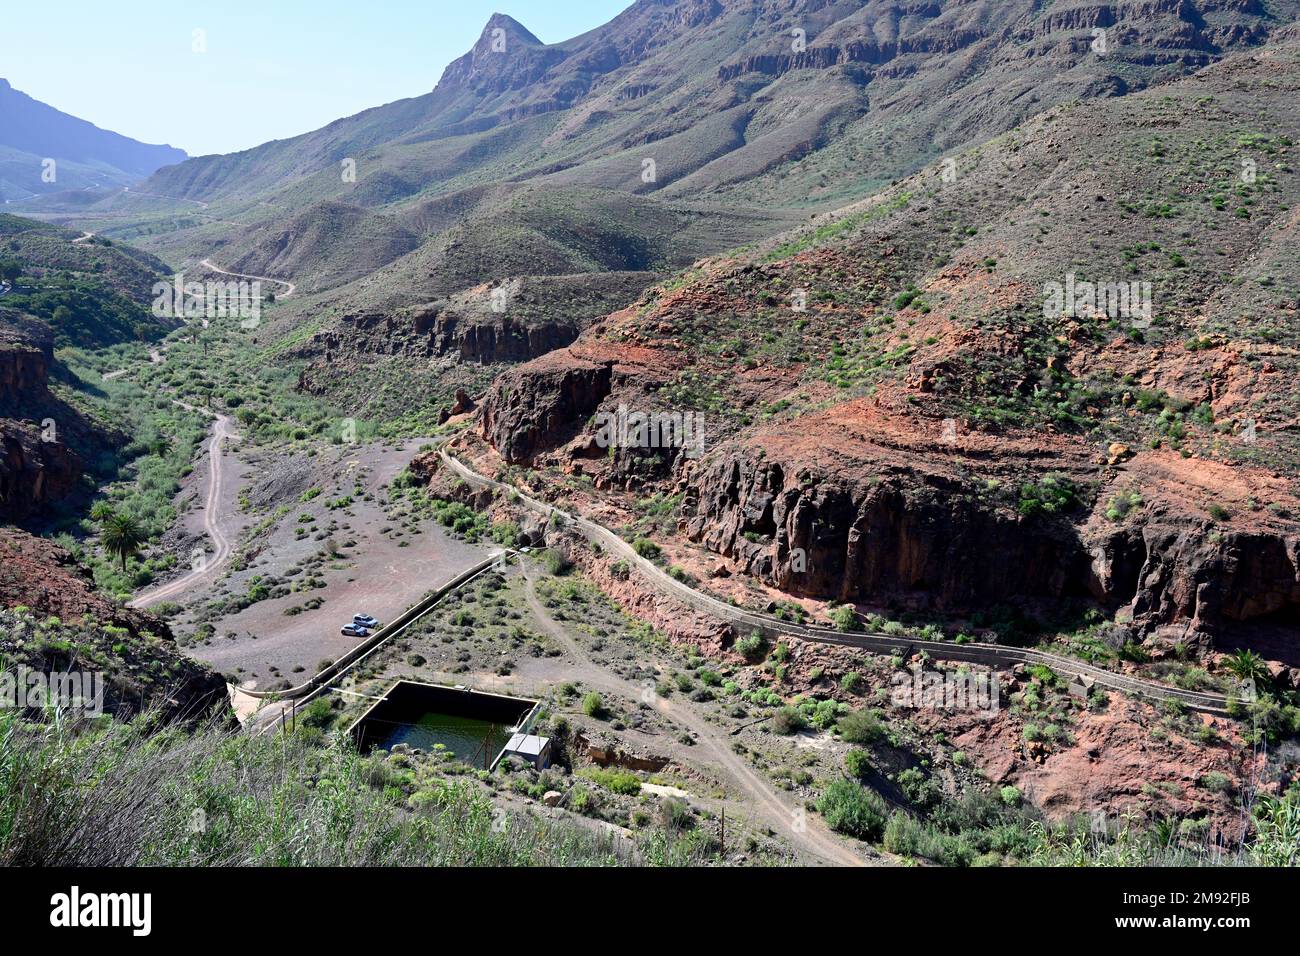 Looking down the gorge and valley of Barranco de Fataga near the small reservoir “Embalse de Fataga”, with old old aqueduct, Gran Canaria Stock Photo